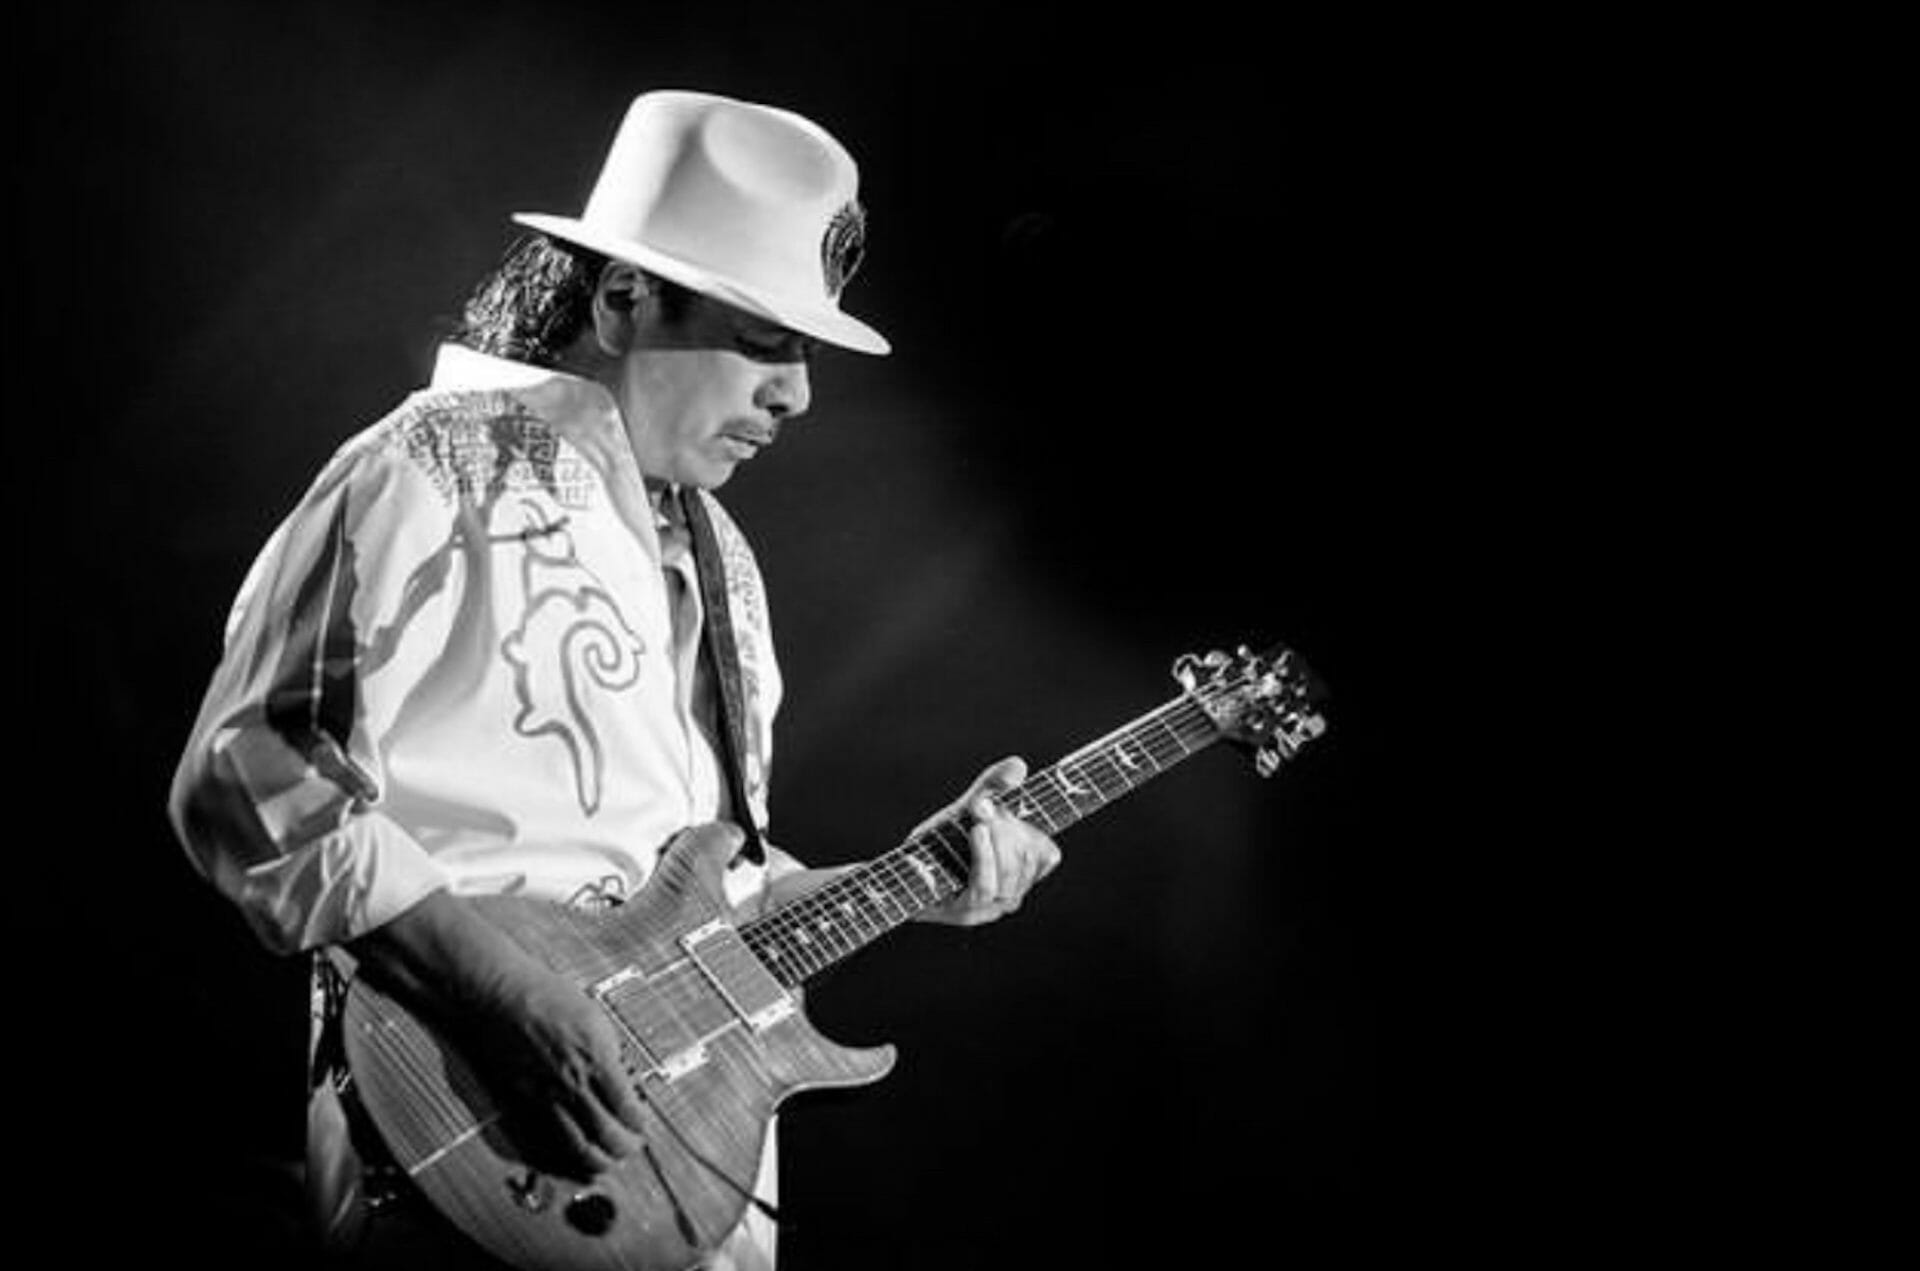 Carlos Santana back on tour following stage collapse